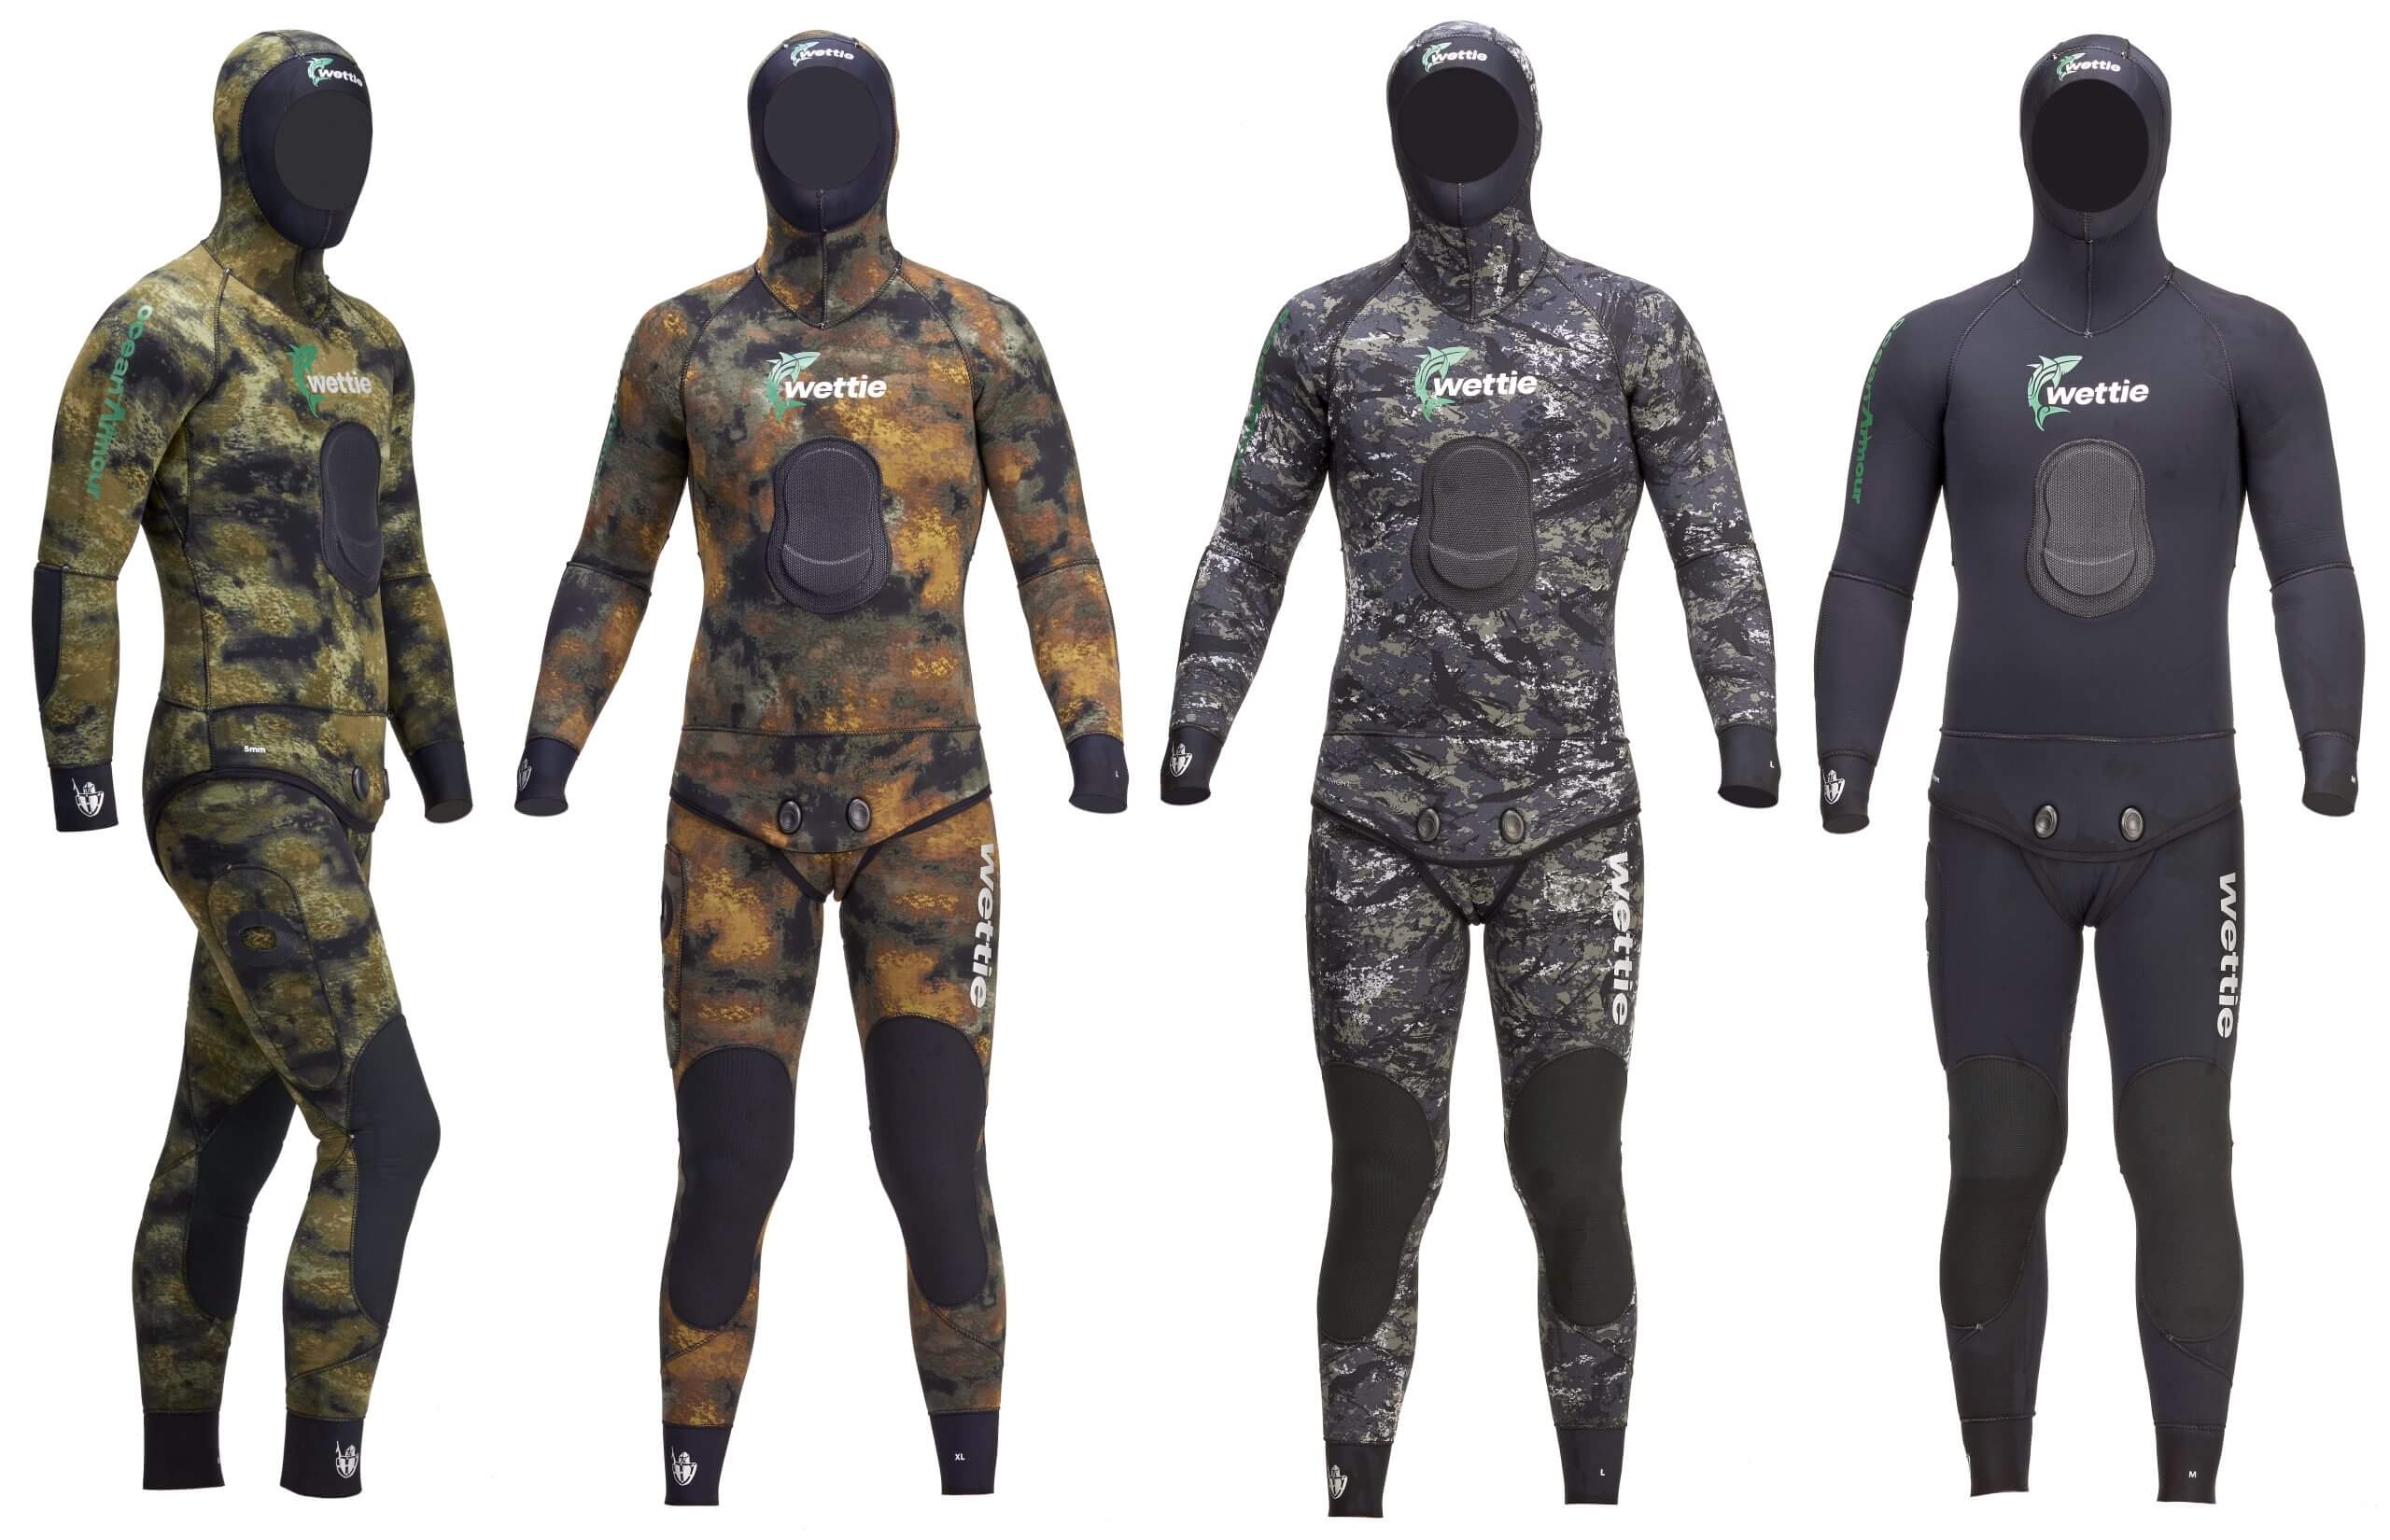 https://www.wettie.co.nz/wp-content/uploads/2018/07/all-ocean-armour-suits-5mm-scaled.jpg